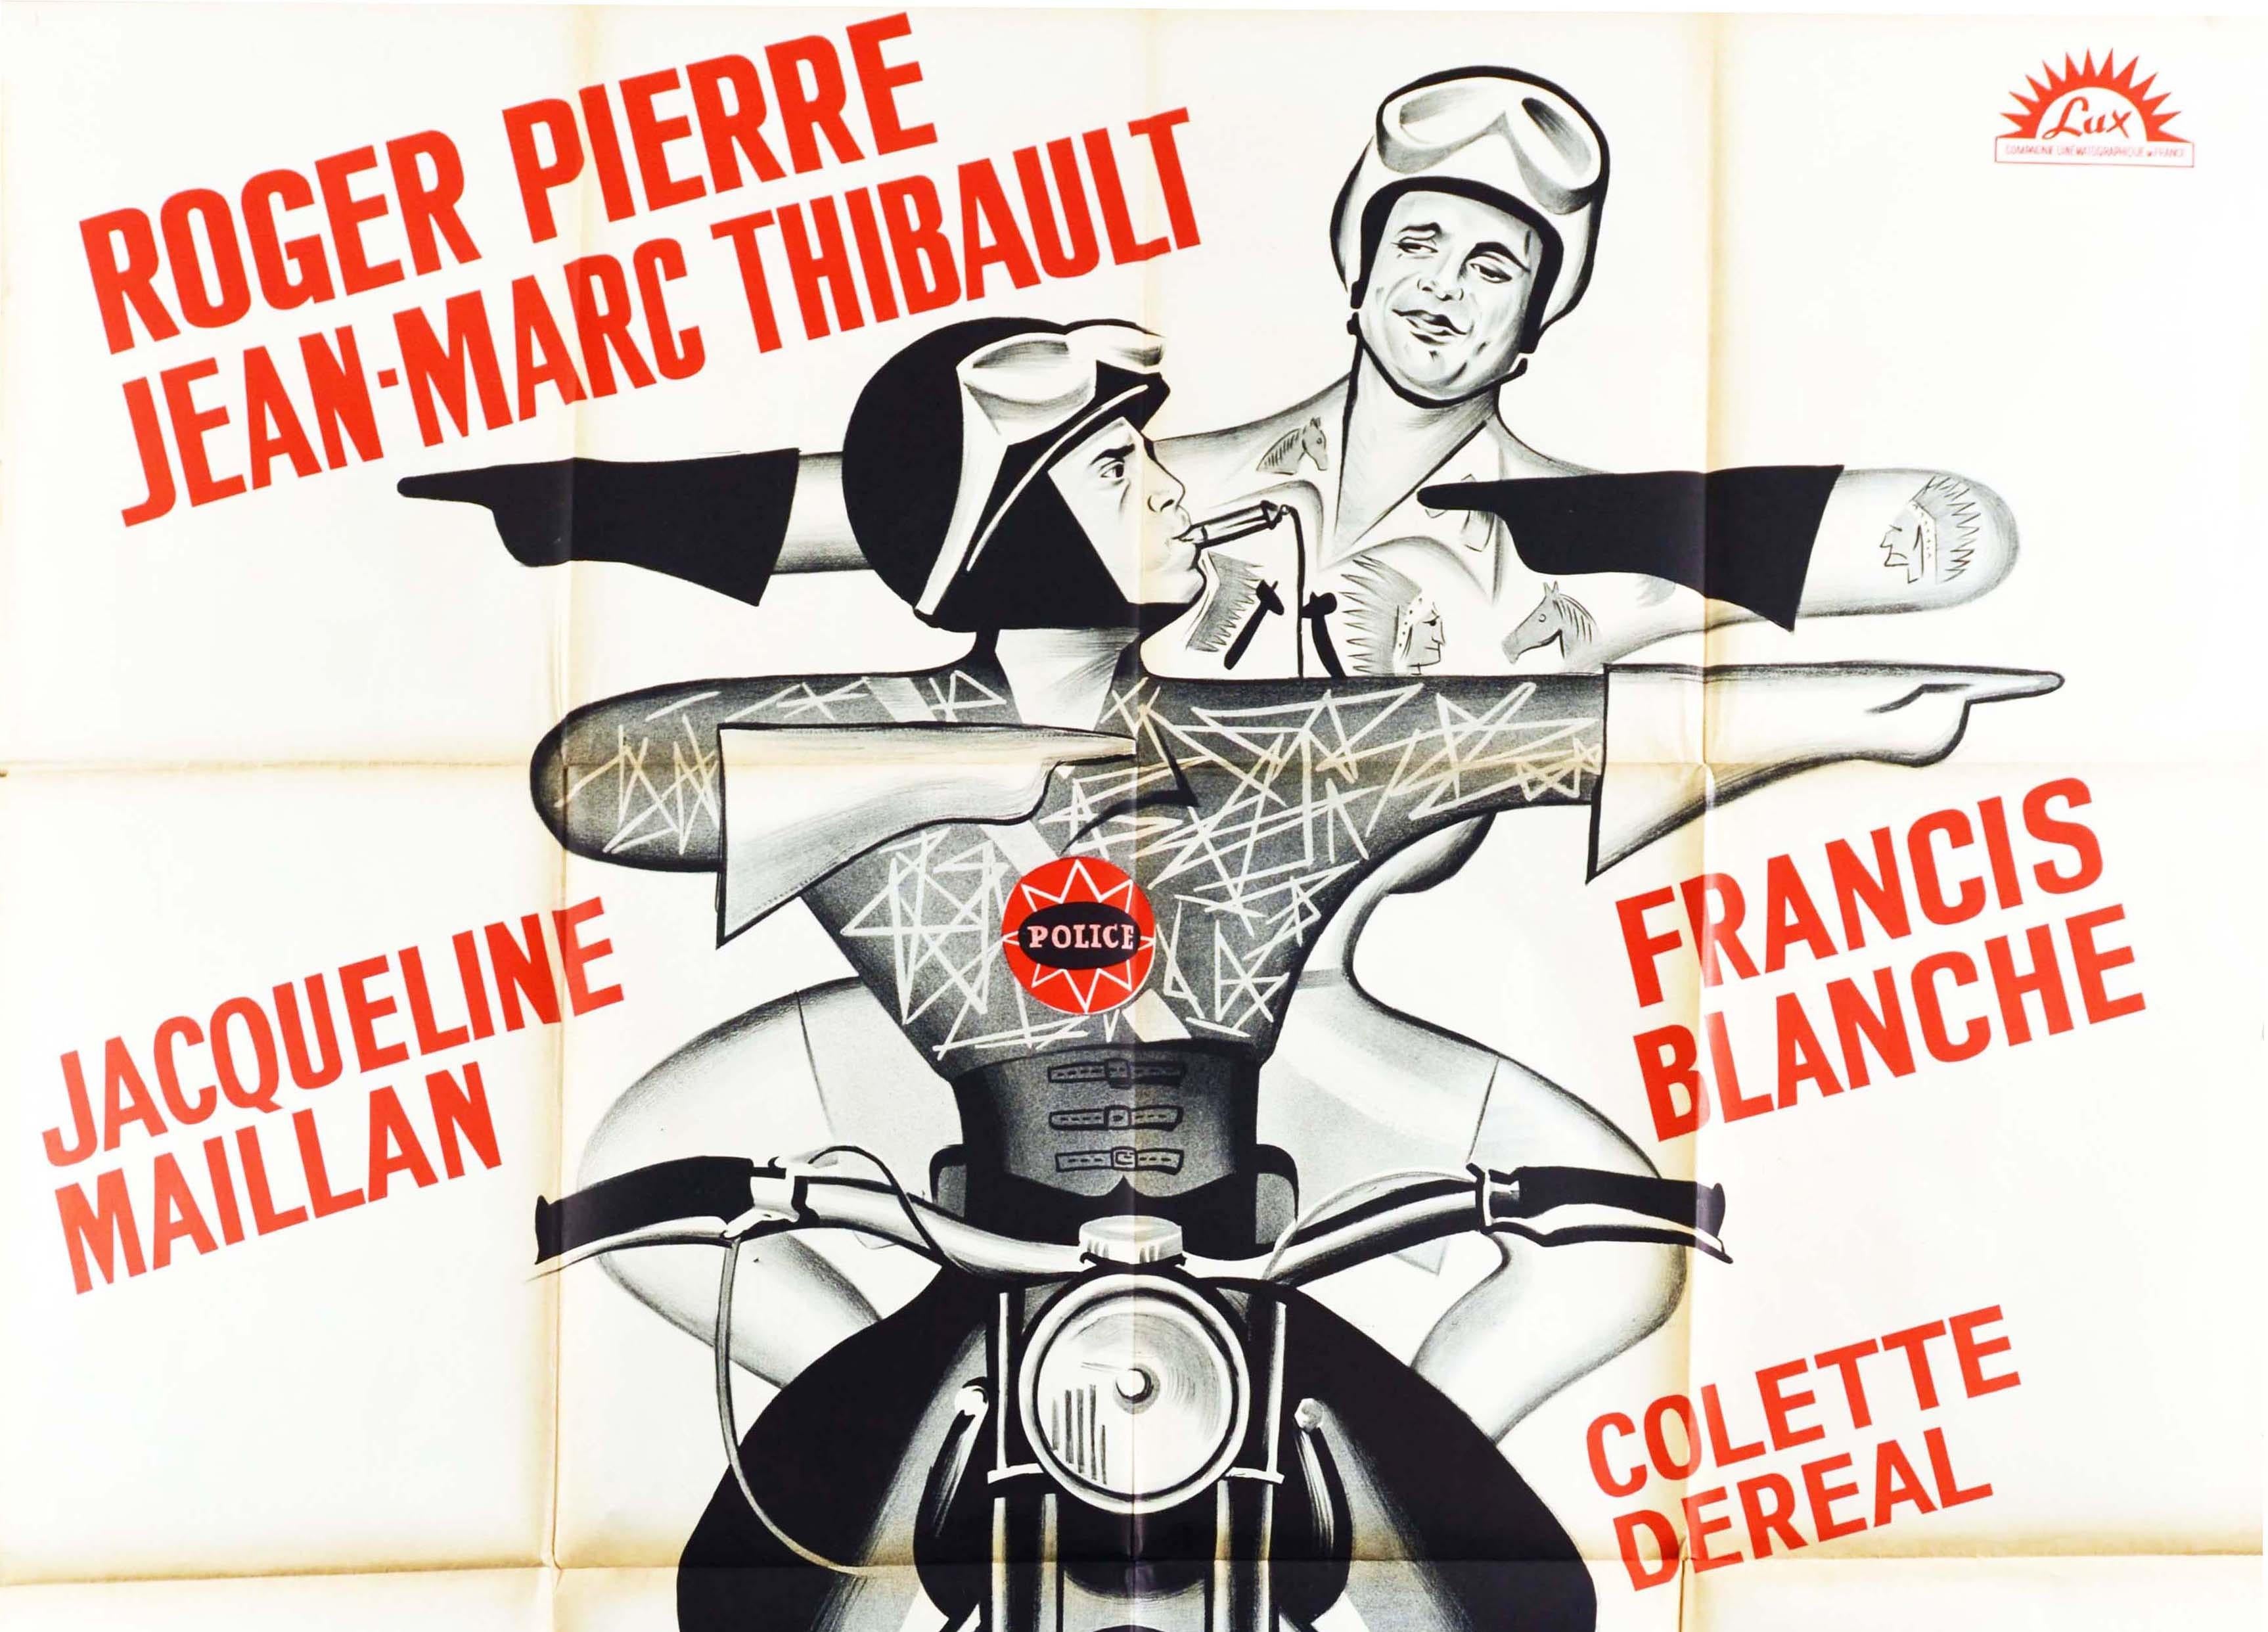 Original vintage movie poster for a French comedy film Les Motards / The Motorcycle Cops directed by Jean Laviron featuring a great design showing two characters Marc and his clumsy brother in law Roger riding on a motorbike and pointing their arms